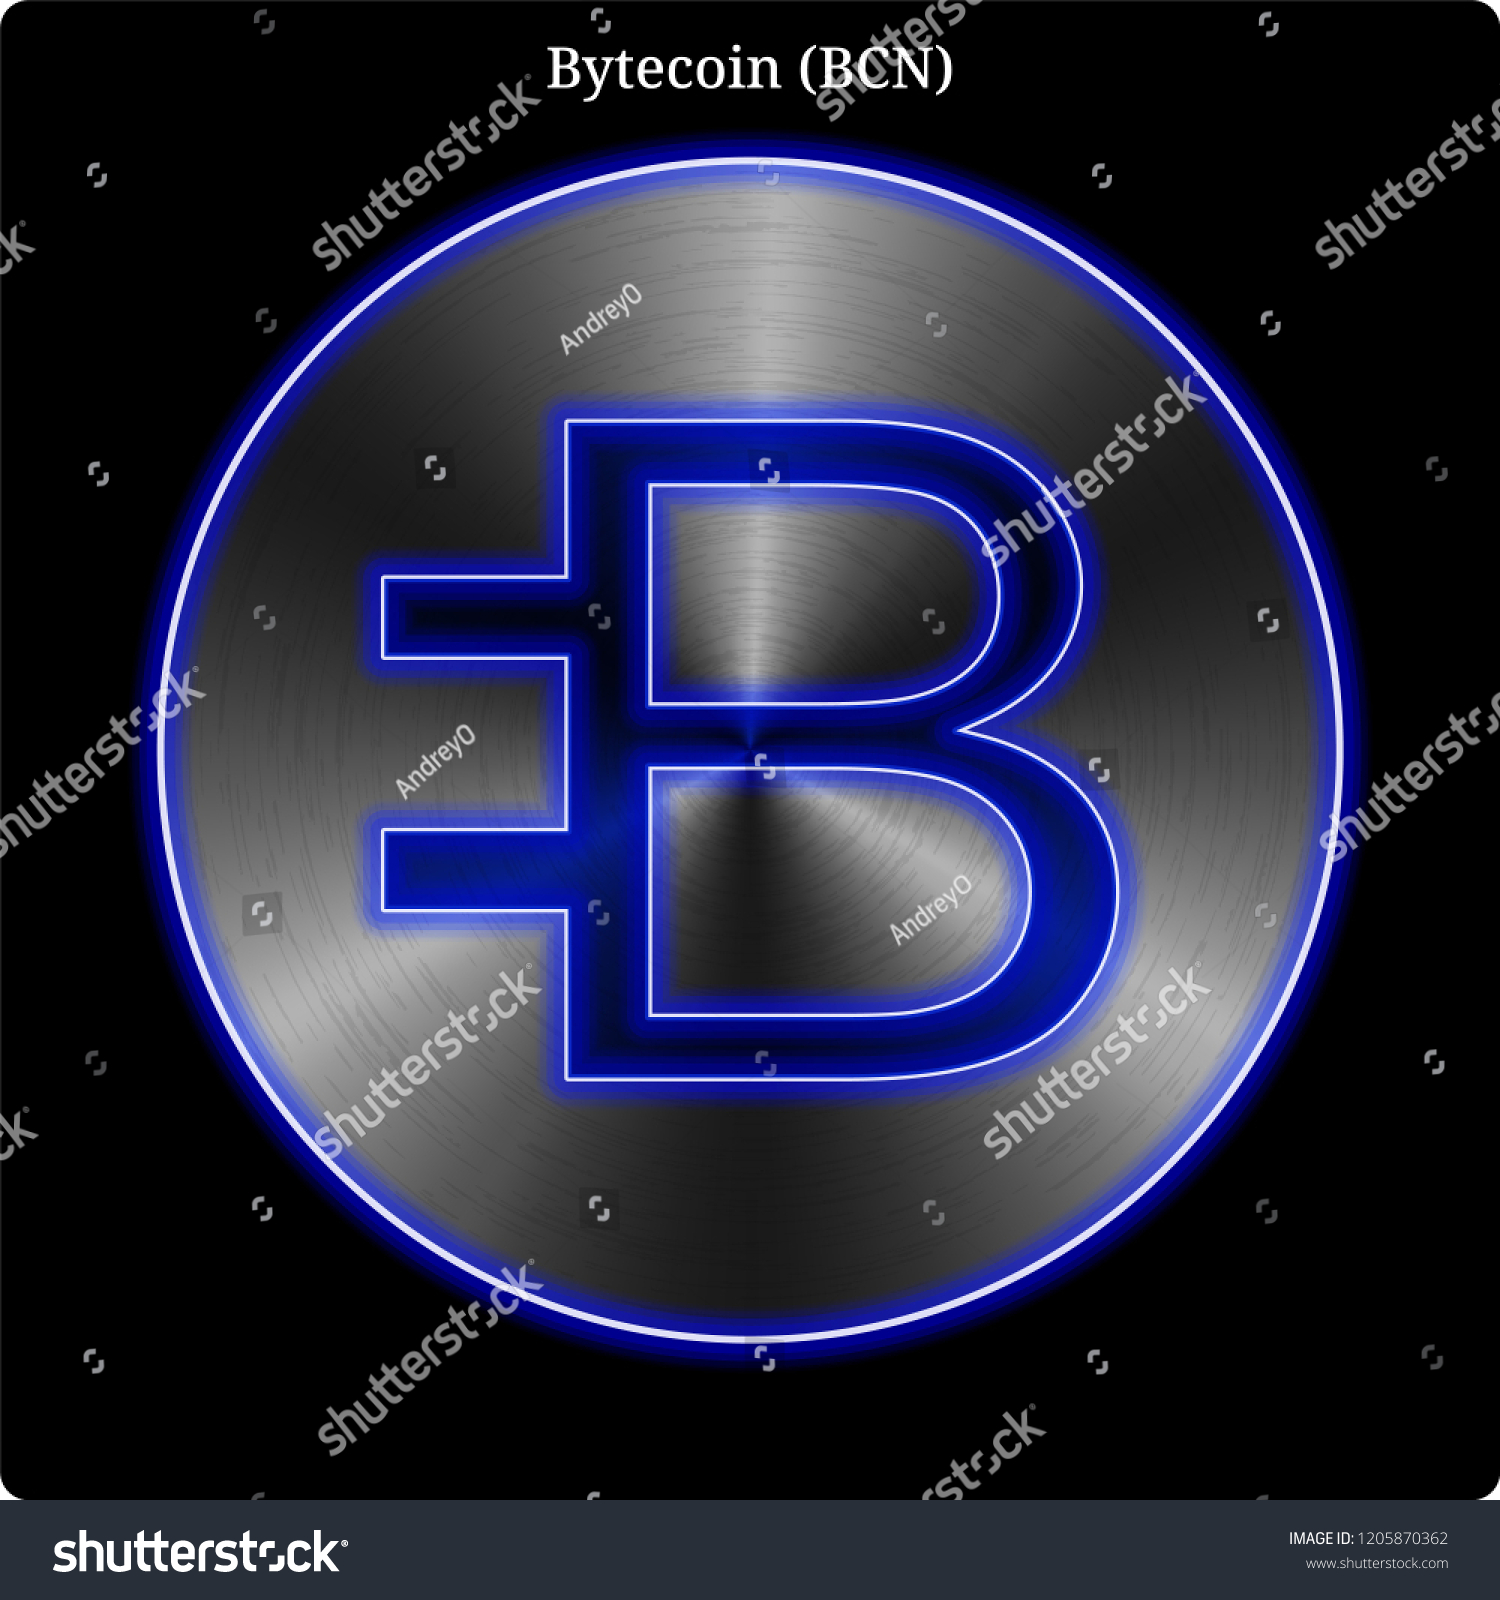 SVG of Metal Bytecoin (BCN) cryptocurrency coin with blue neon glow. svg